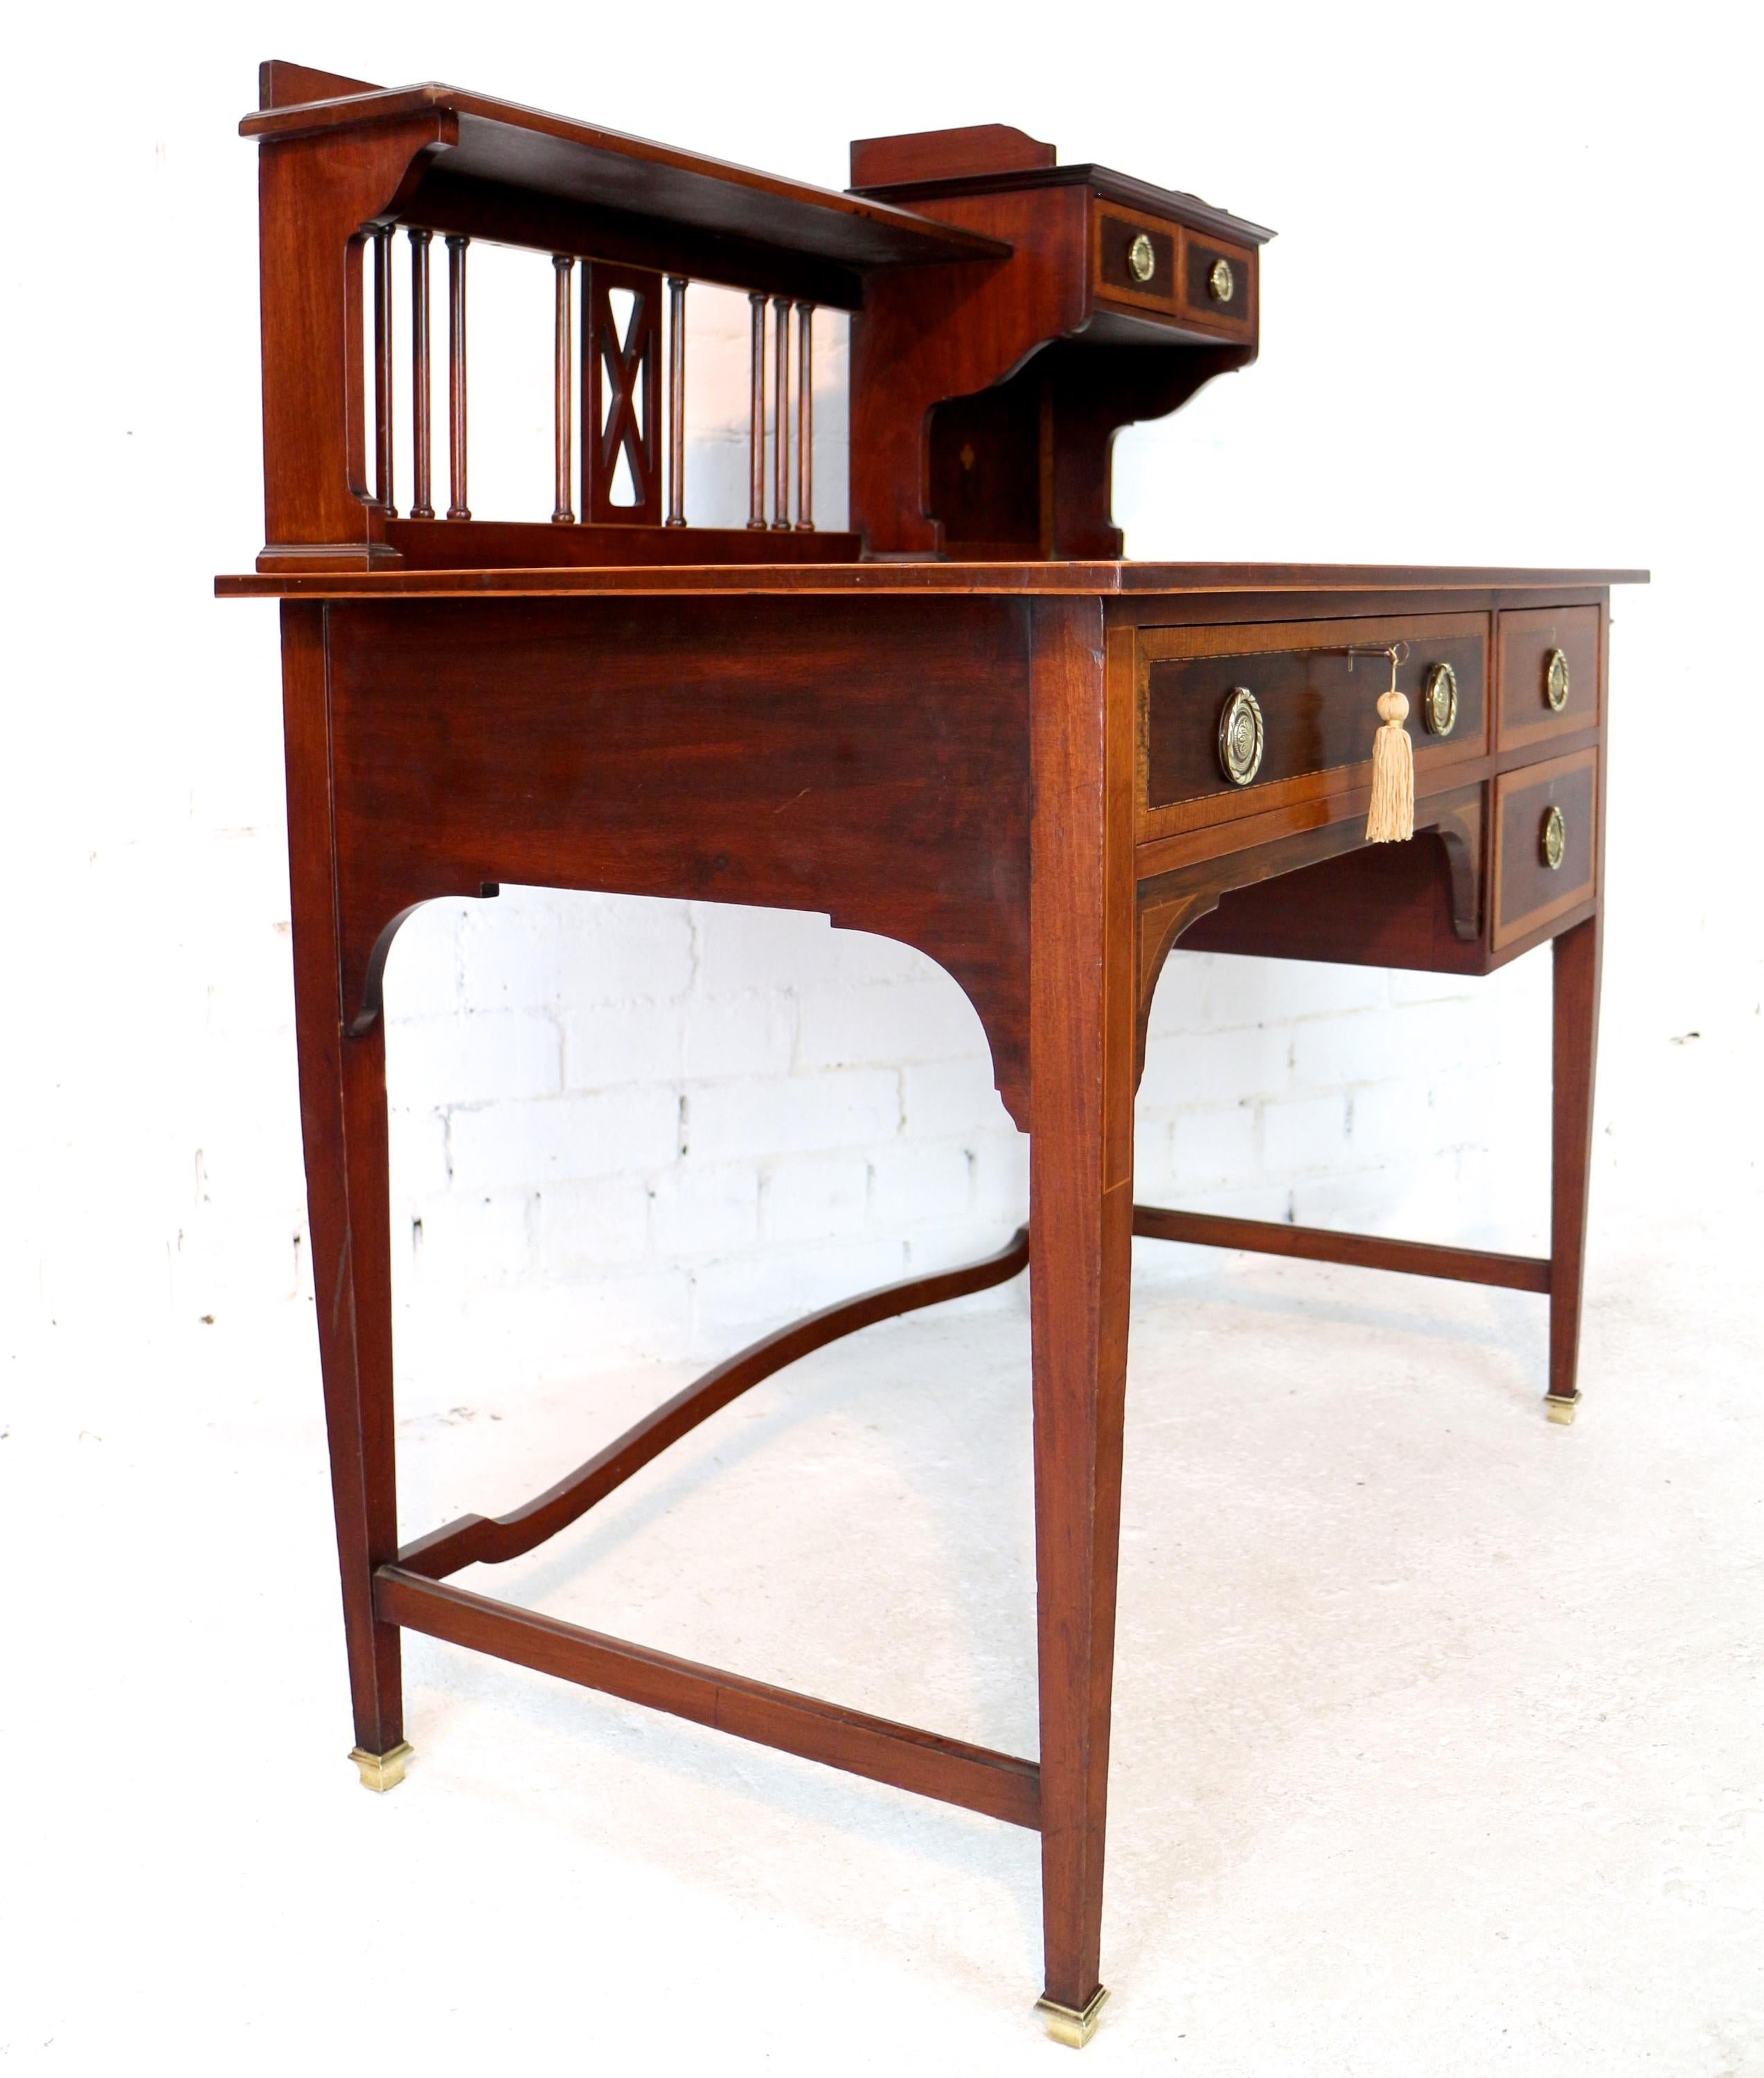 Sheraton Revival Mahogany and Inlaid Desk, Attributed to Shapland & Petter 12